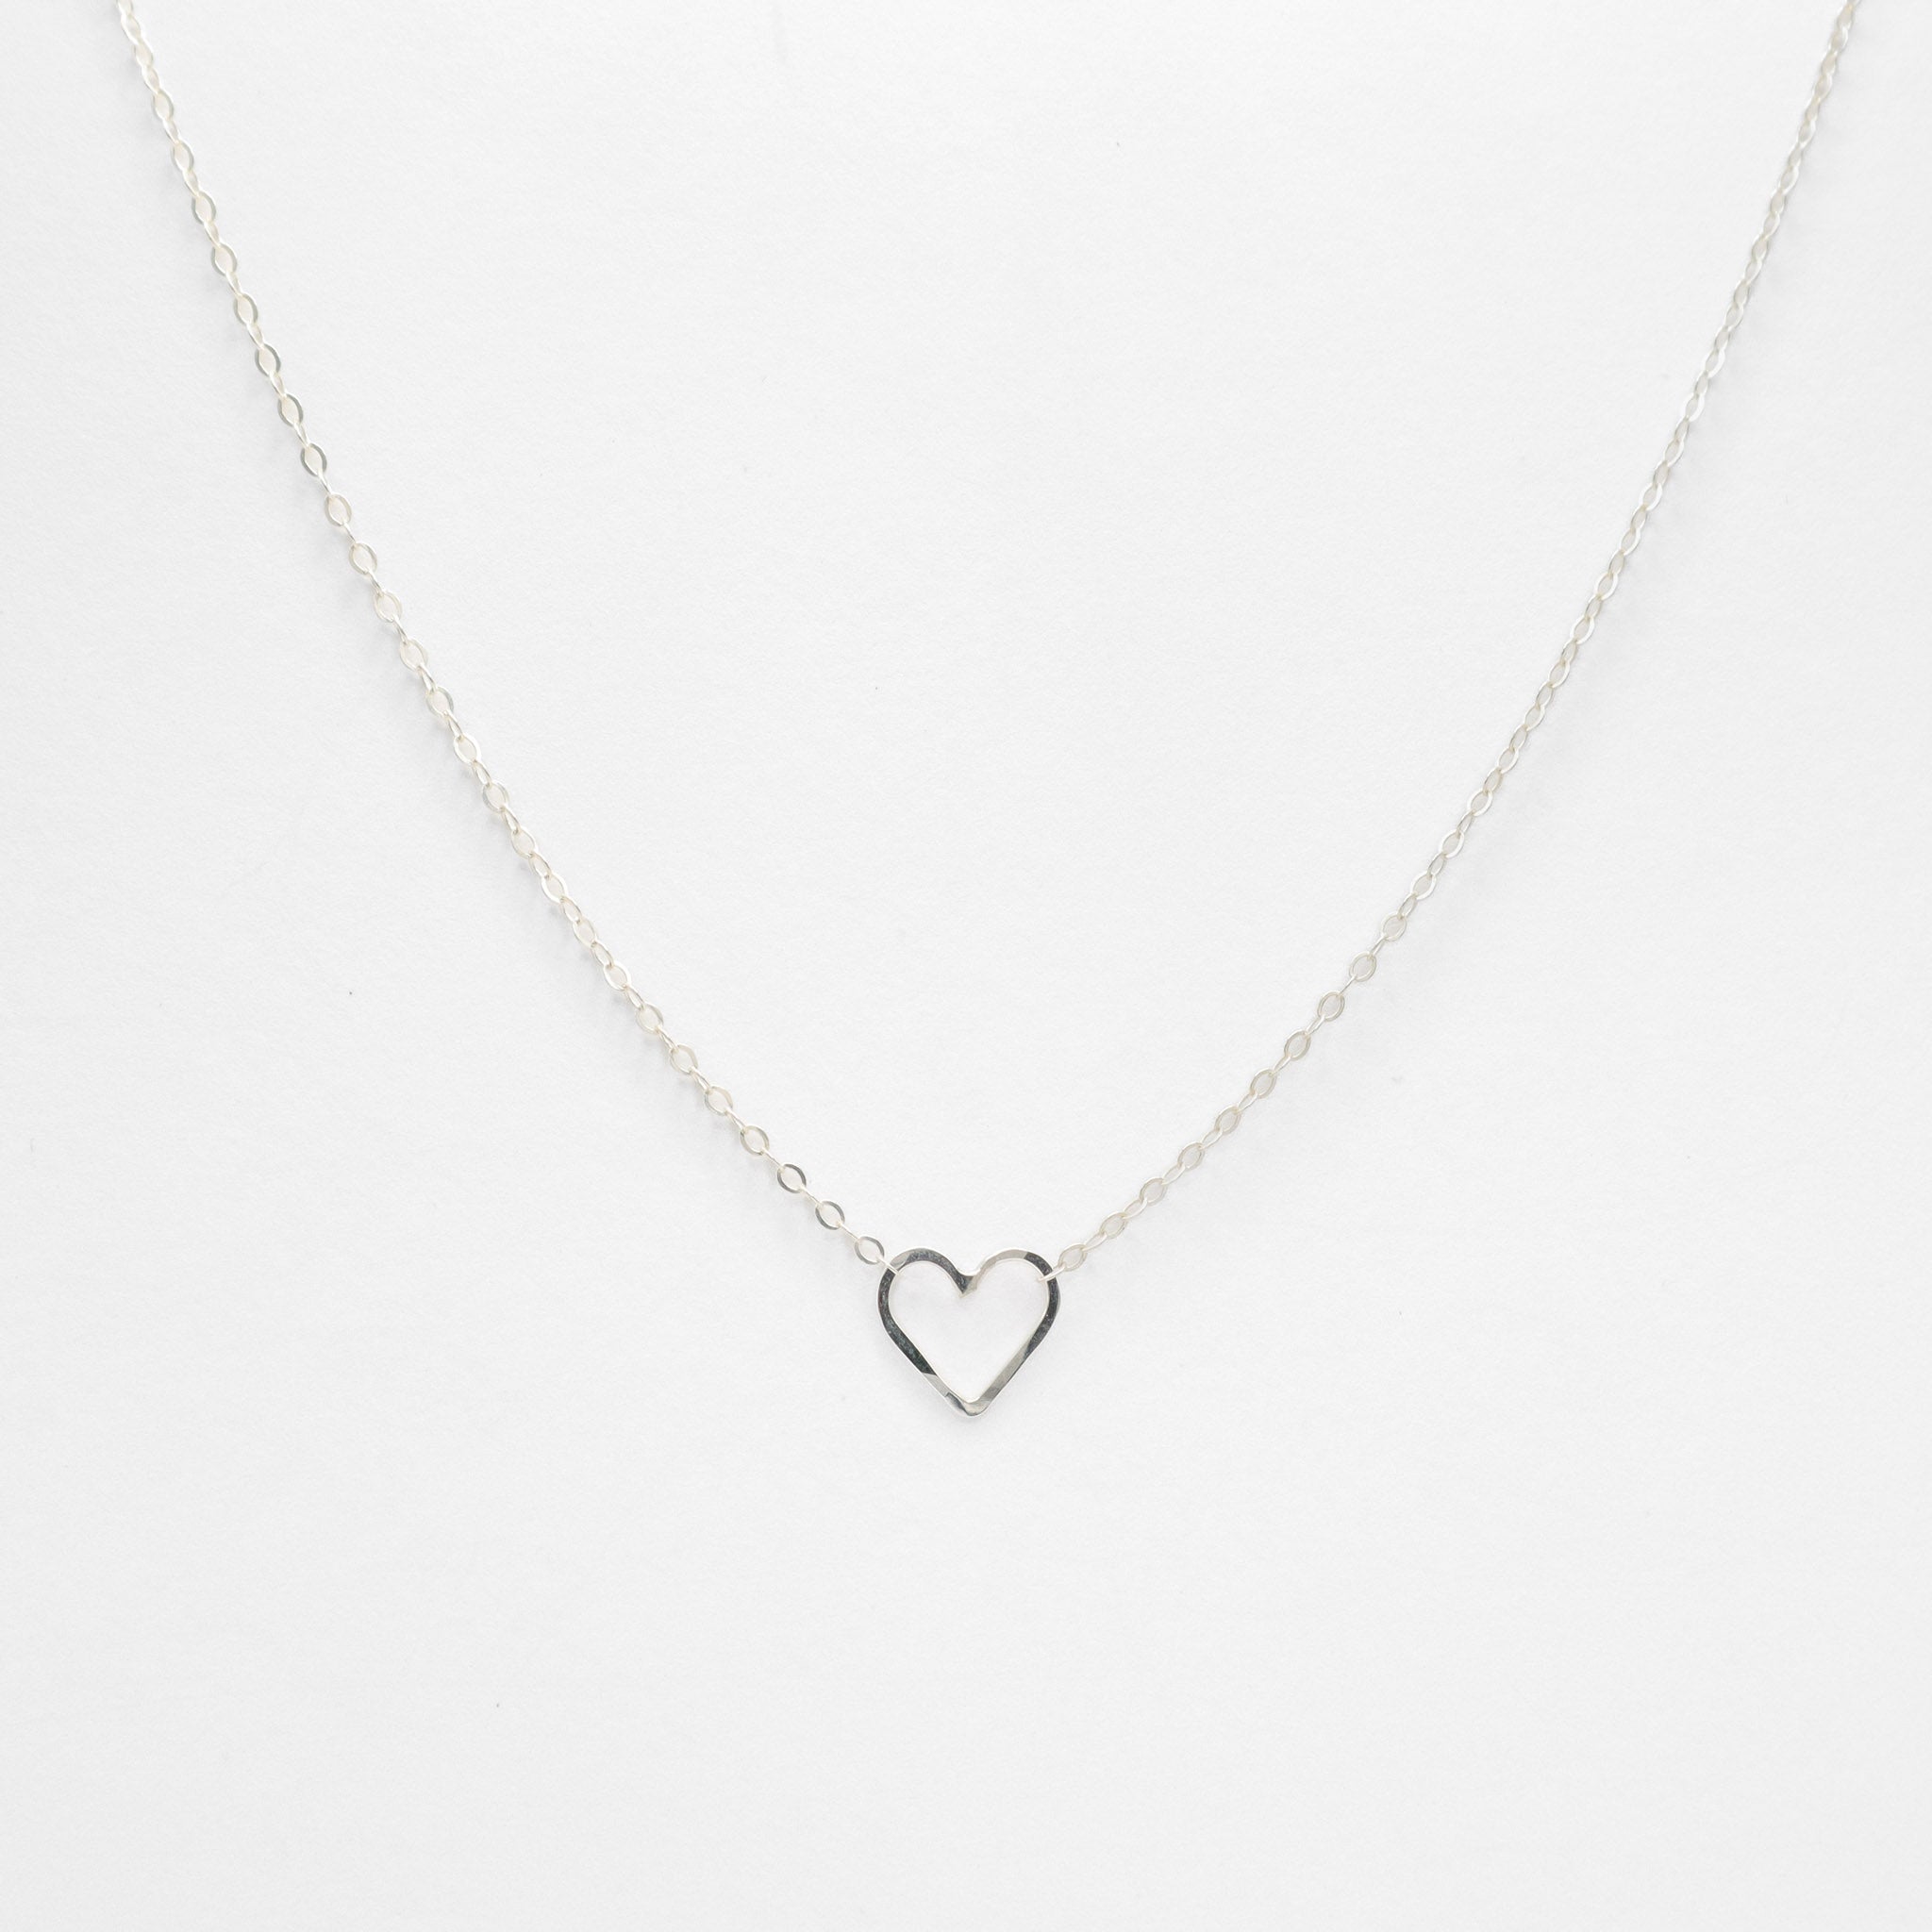 Silver Sweetheart Necklace, featured image